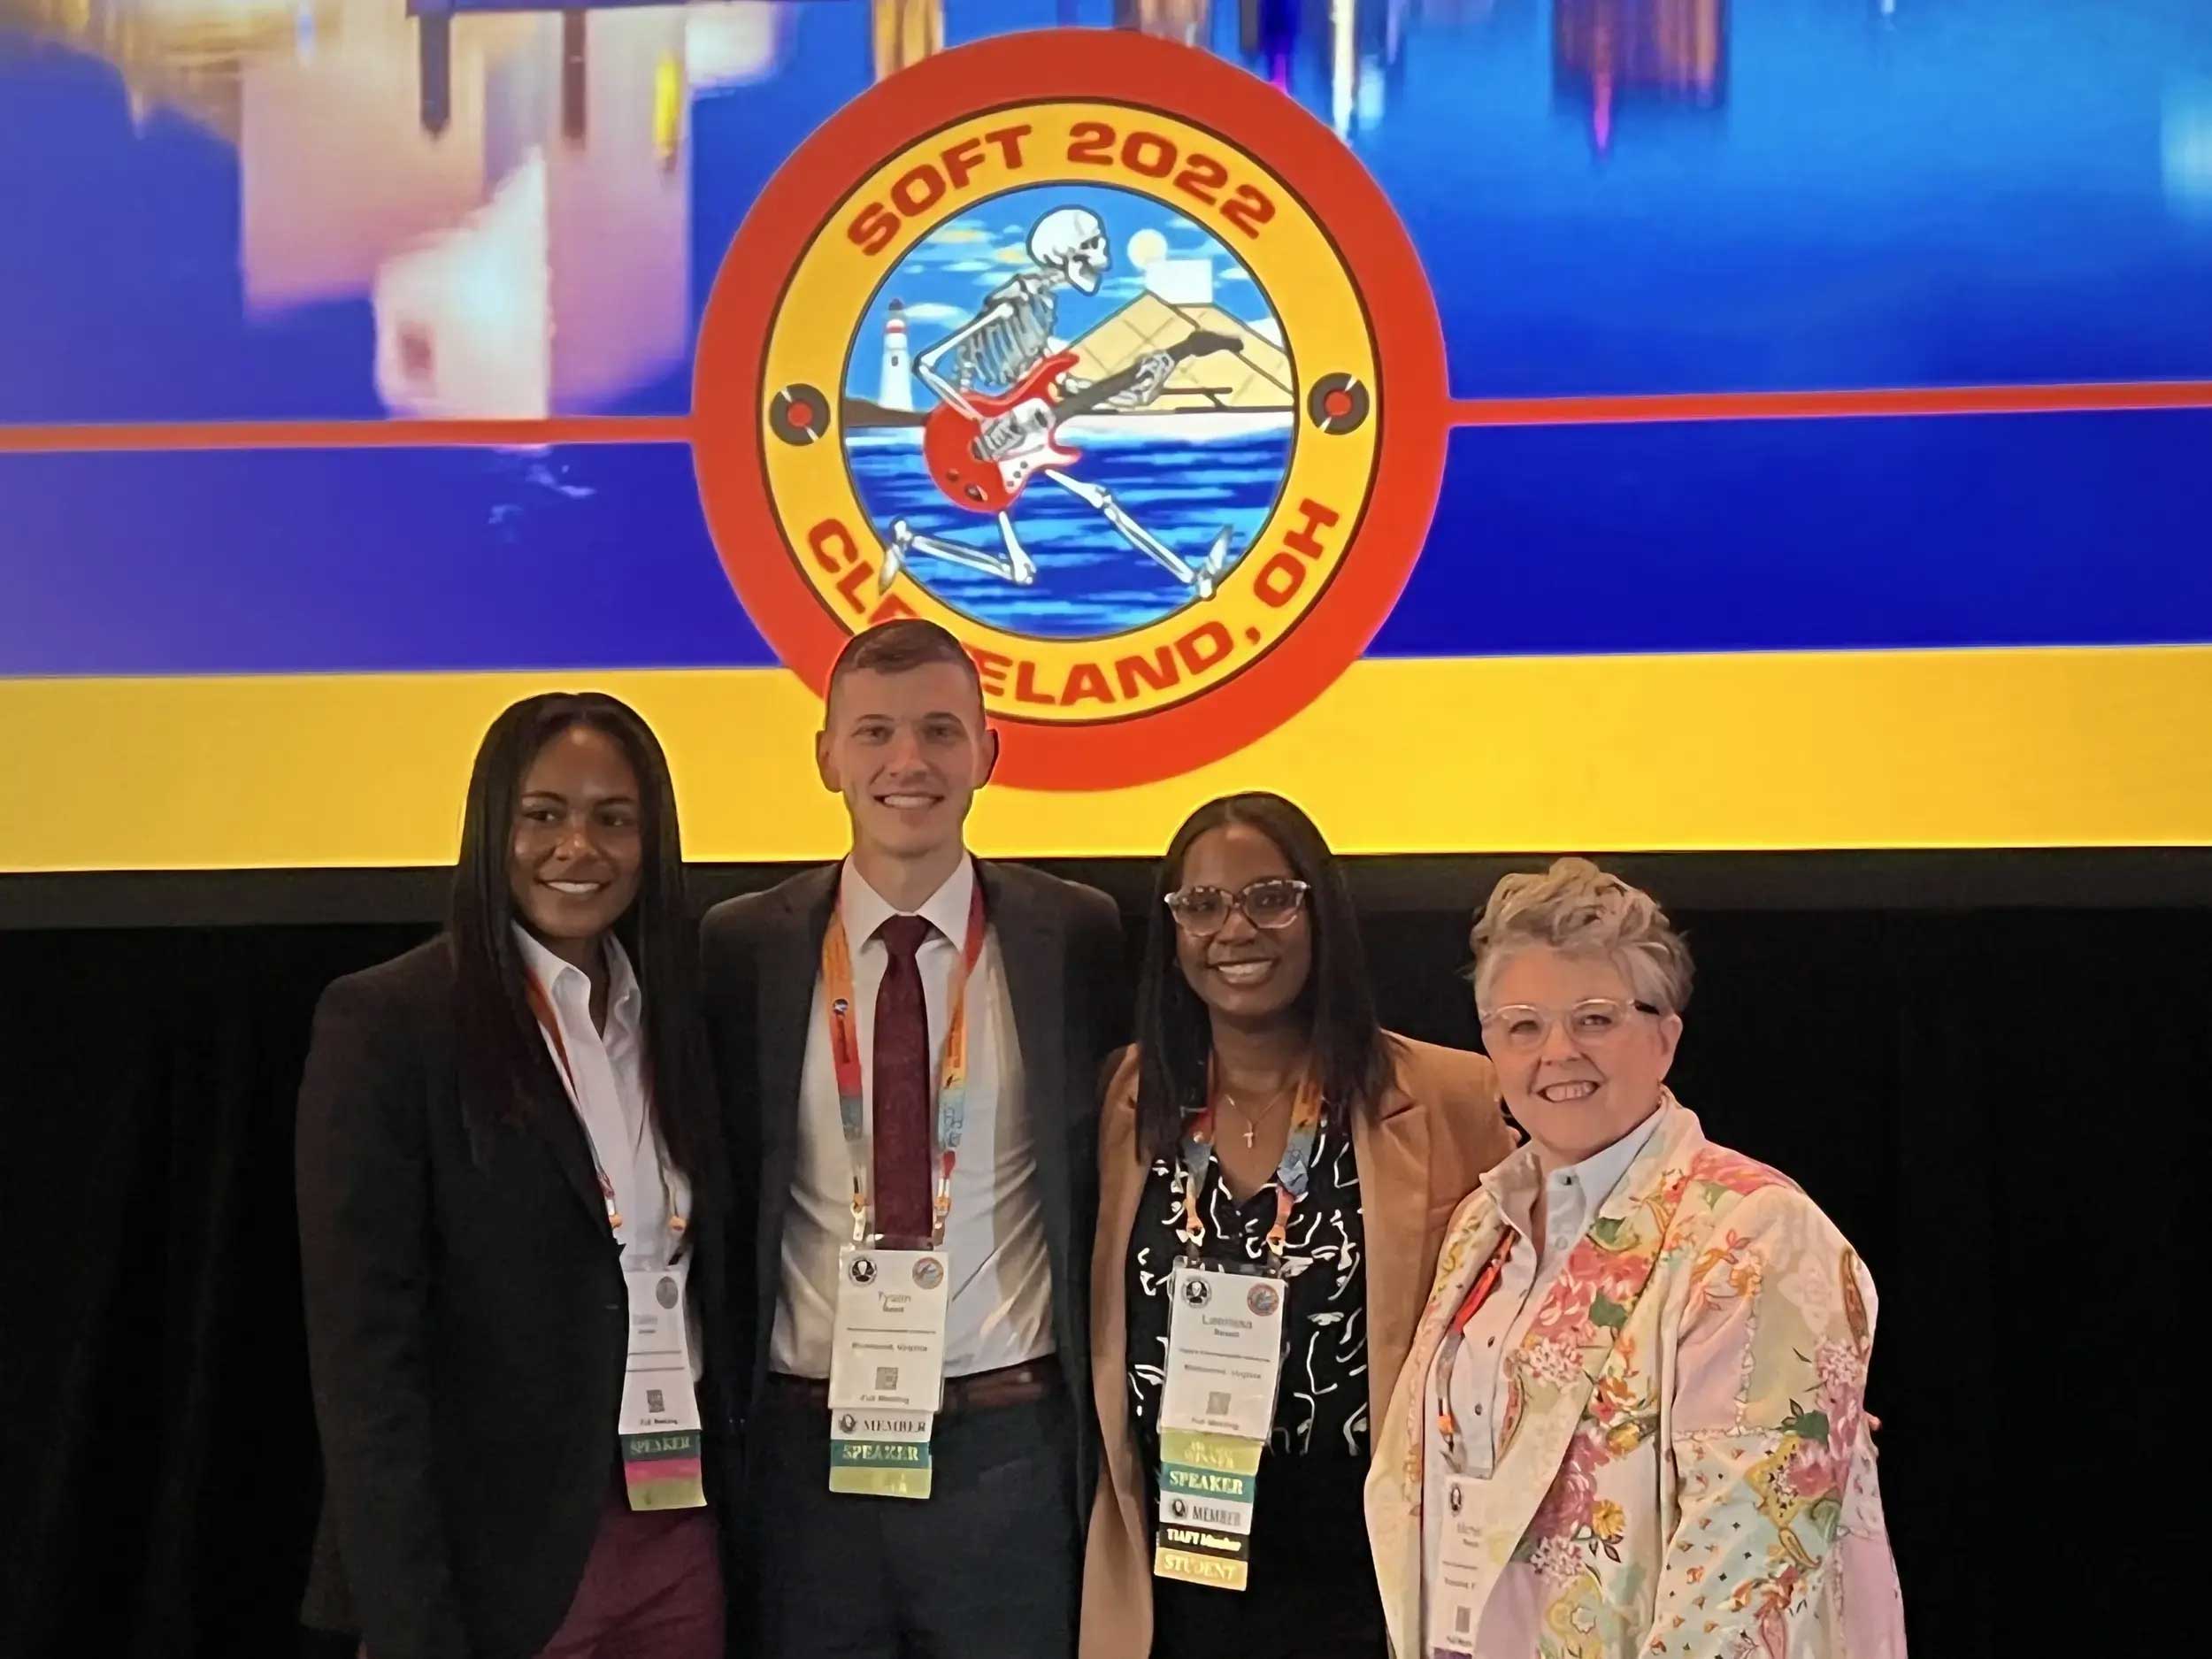 From left, VCU forensic science alum Bailey Jones; VCU forensic science doctoral student Tyson Baird; VCU forensic science alum and former lab manager Laerissa Reveil; and Michelle Peace, Ph.D., associate professor in the Department of Forensic Science in the College of Humanities and Sciences.